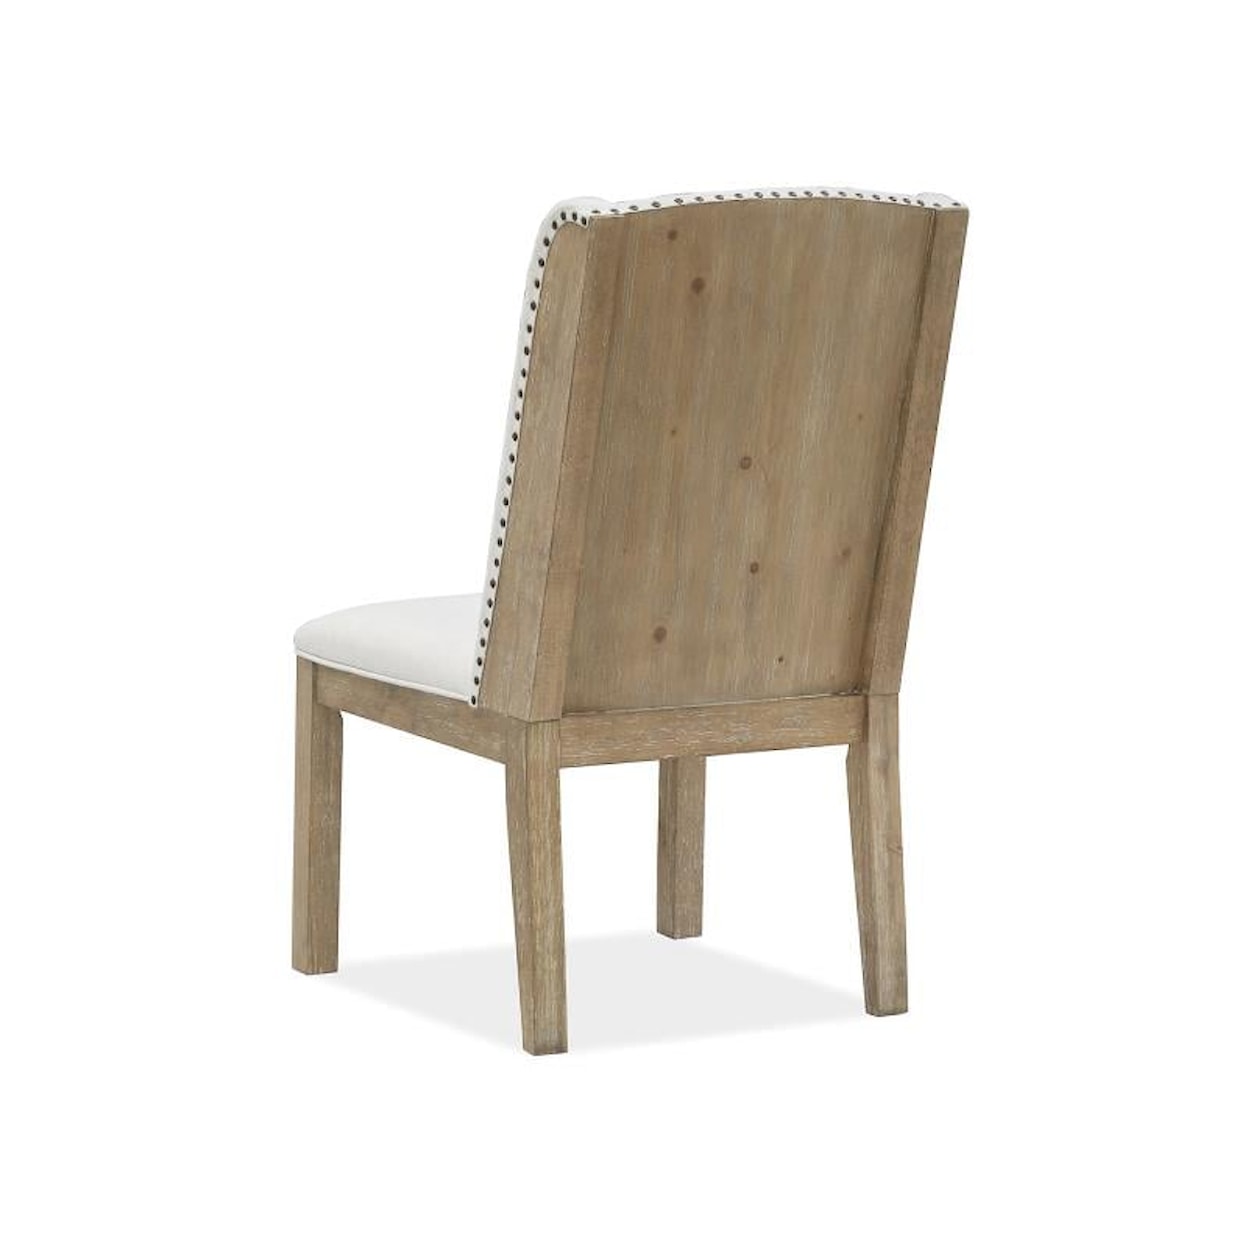 Belfort Select Glenmore Upholstered Dining Side Chair 